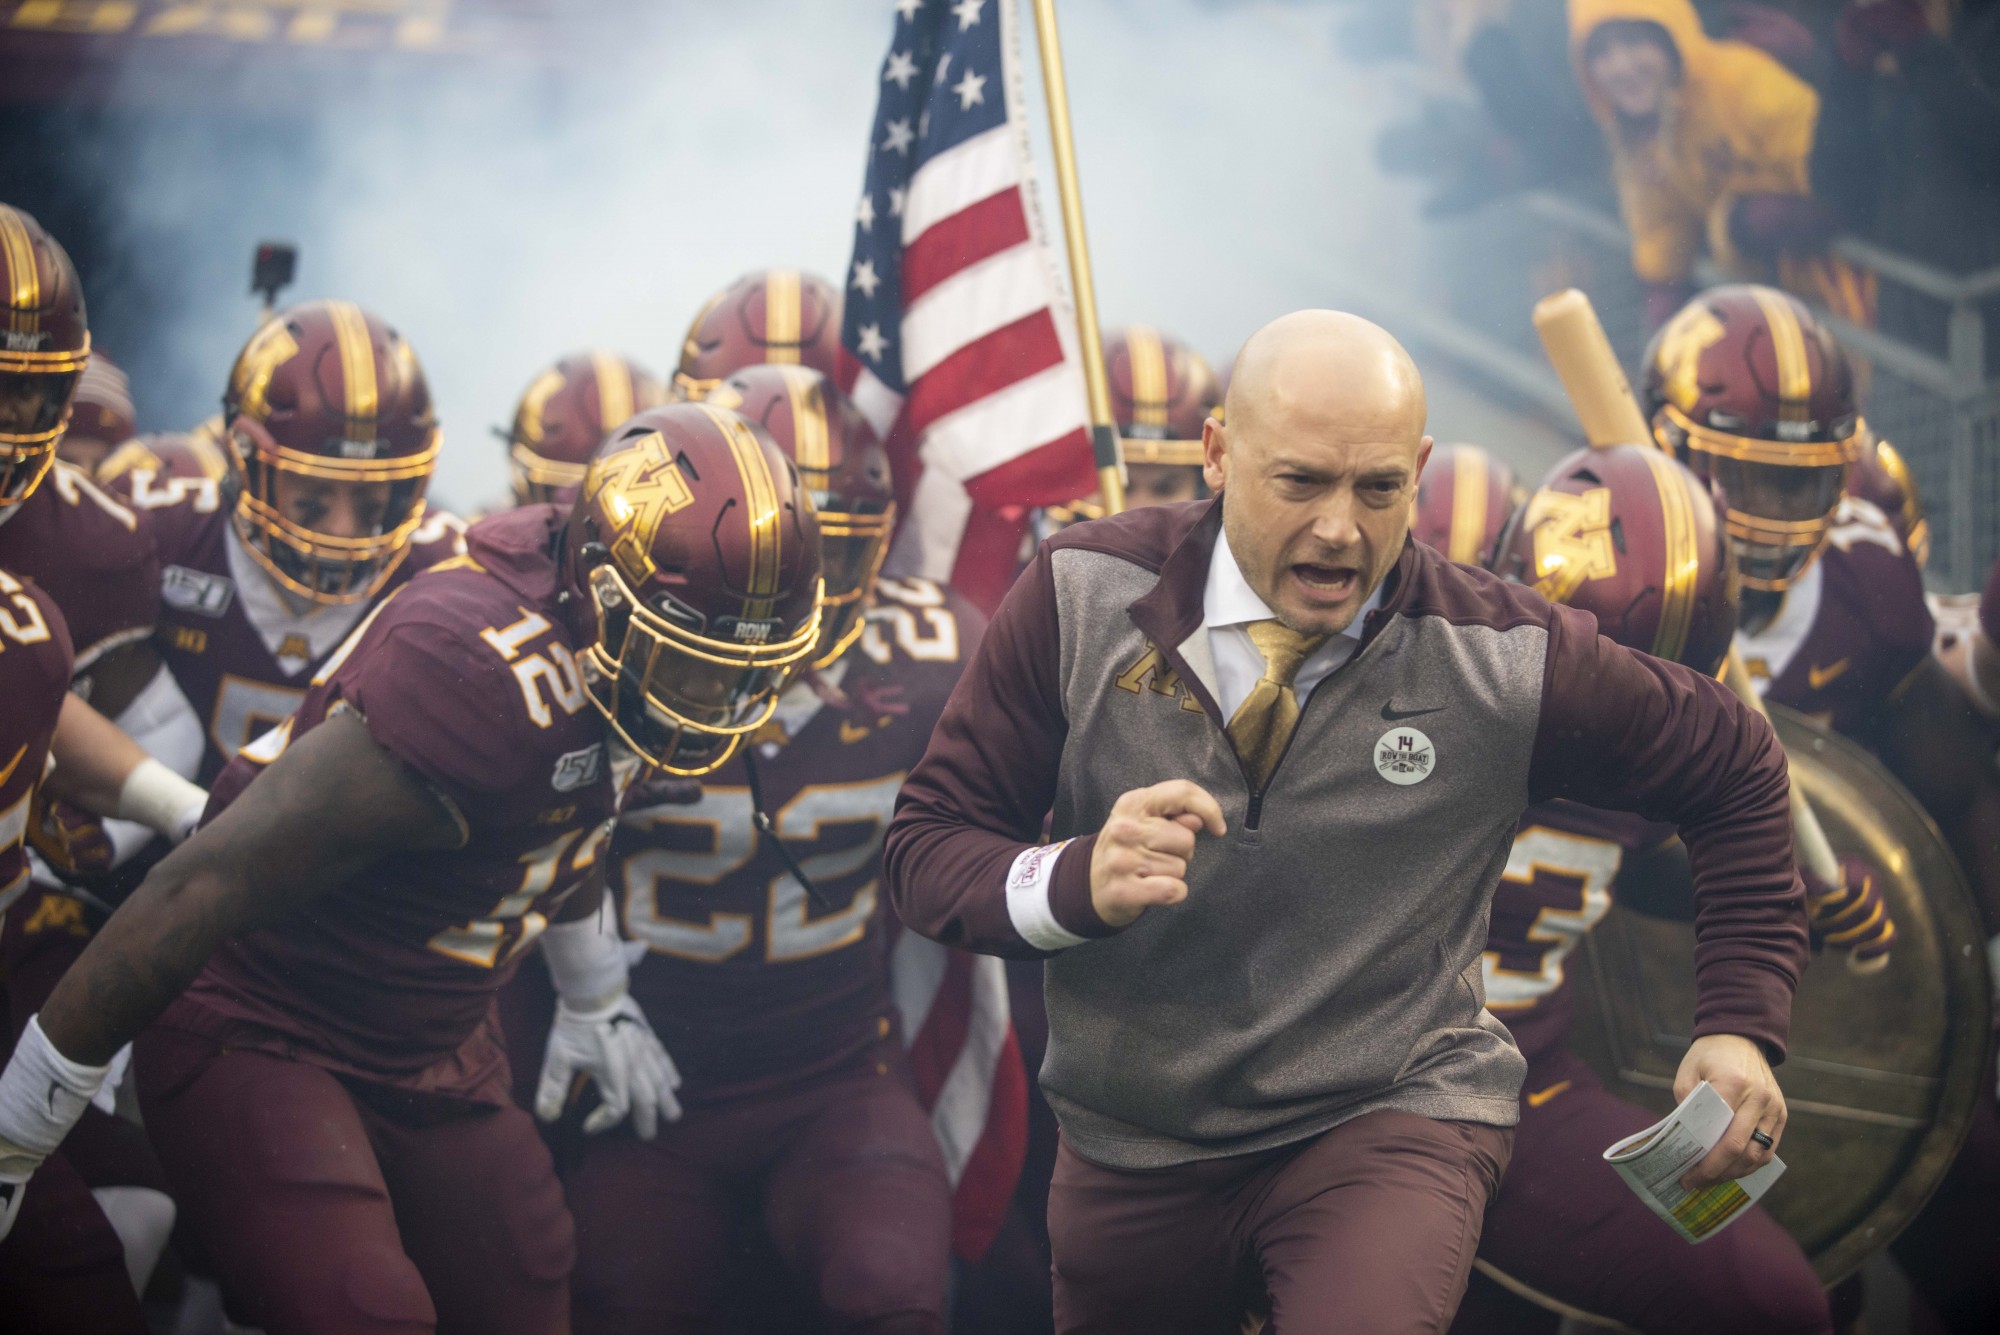 The Gophers make their entrance onto the field at TCF Bank Stadium on Saturday, Nov. 30, 2019.